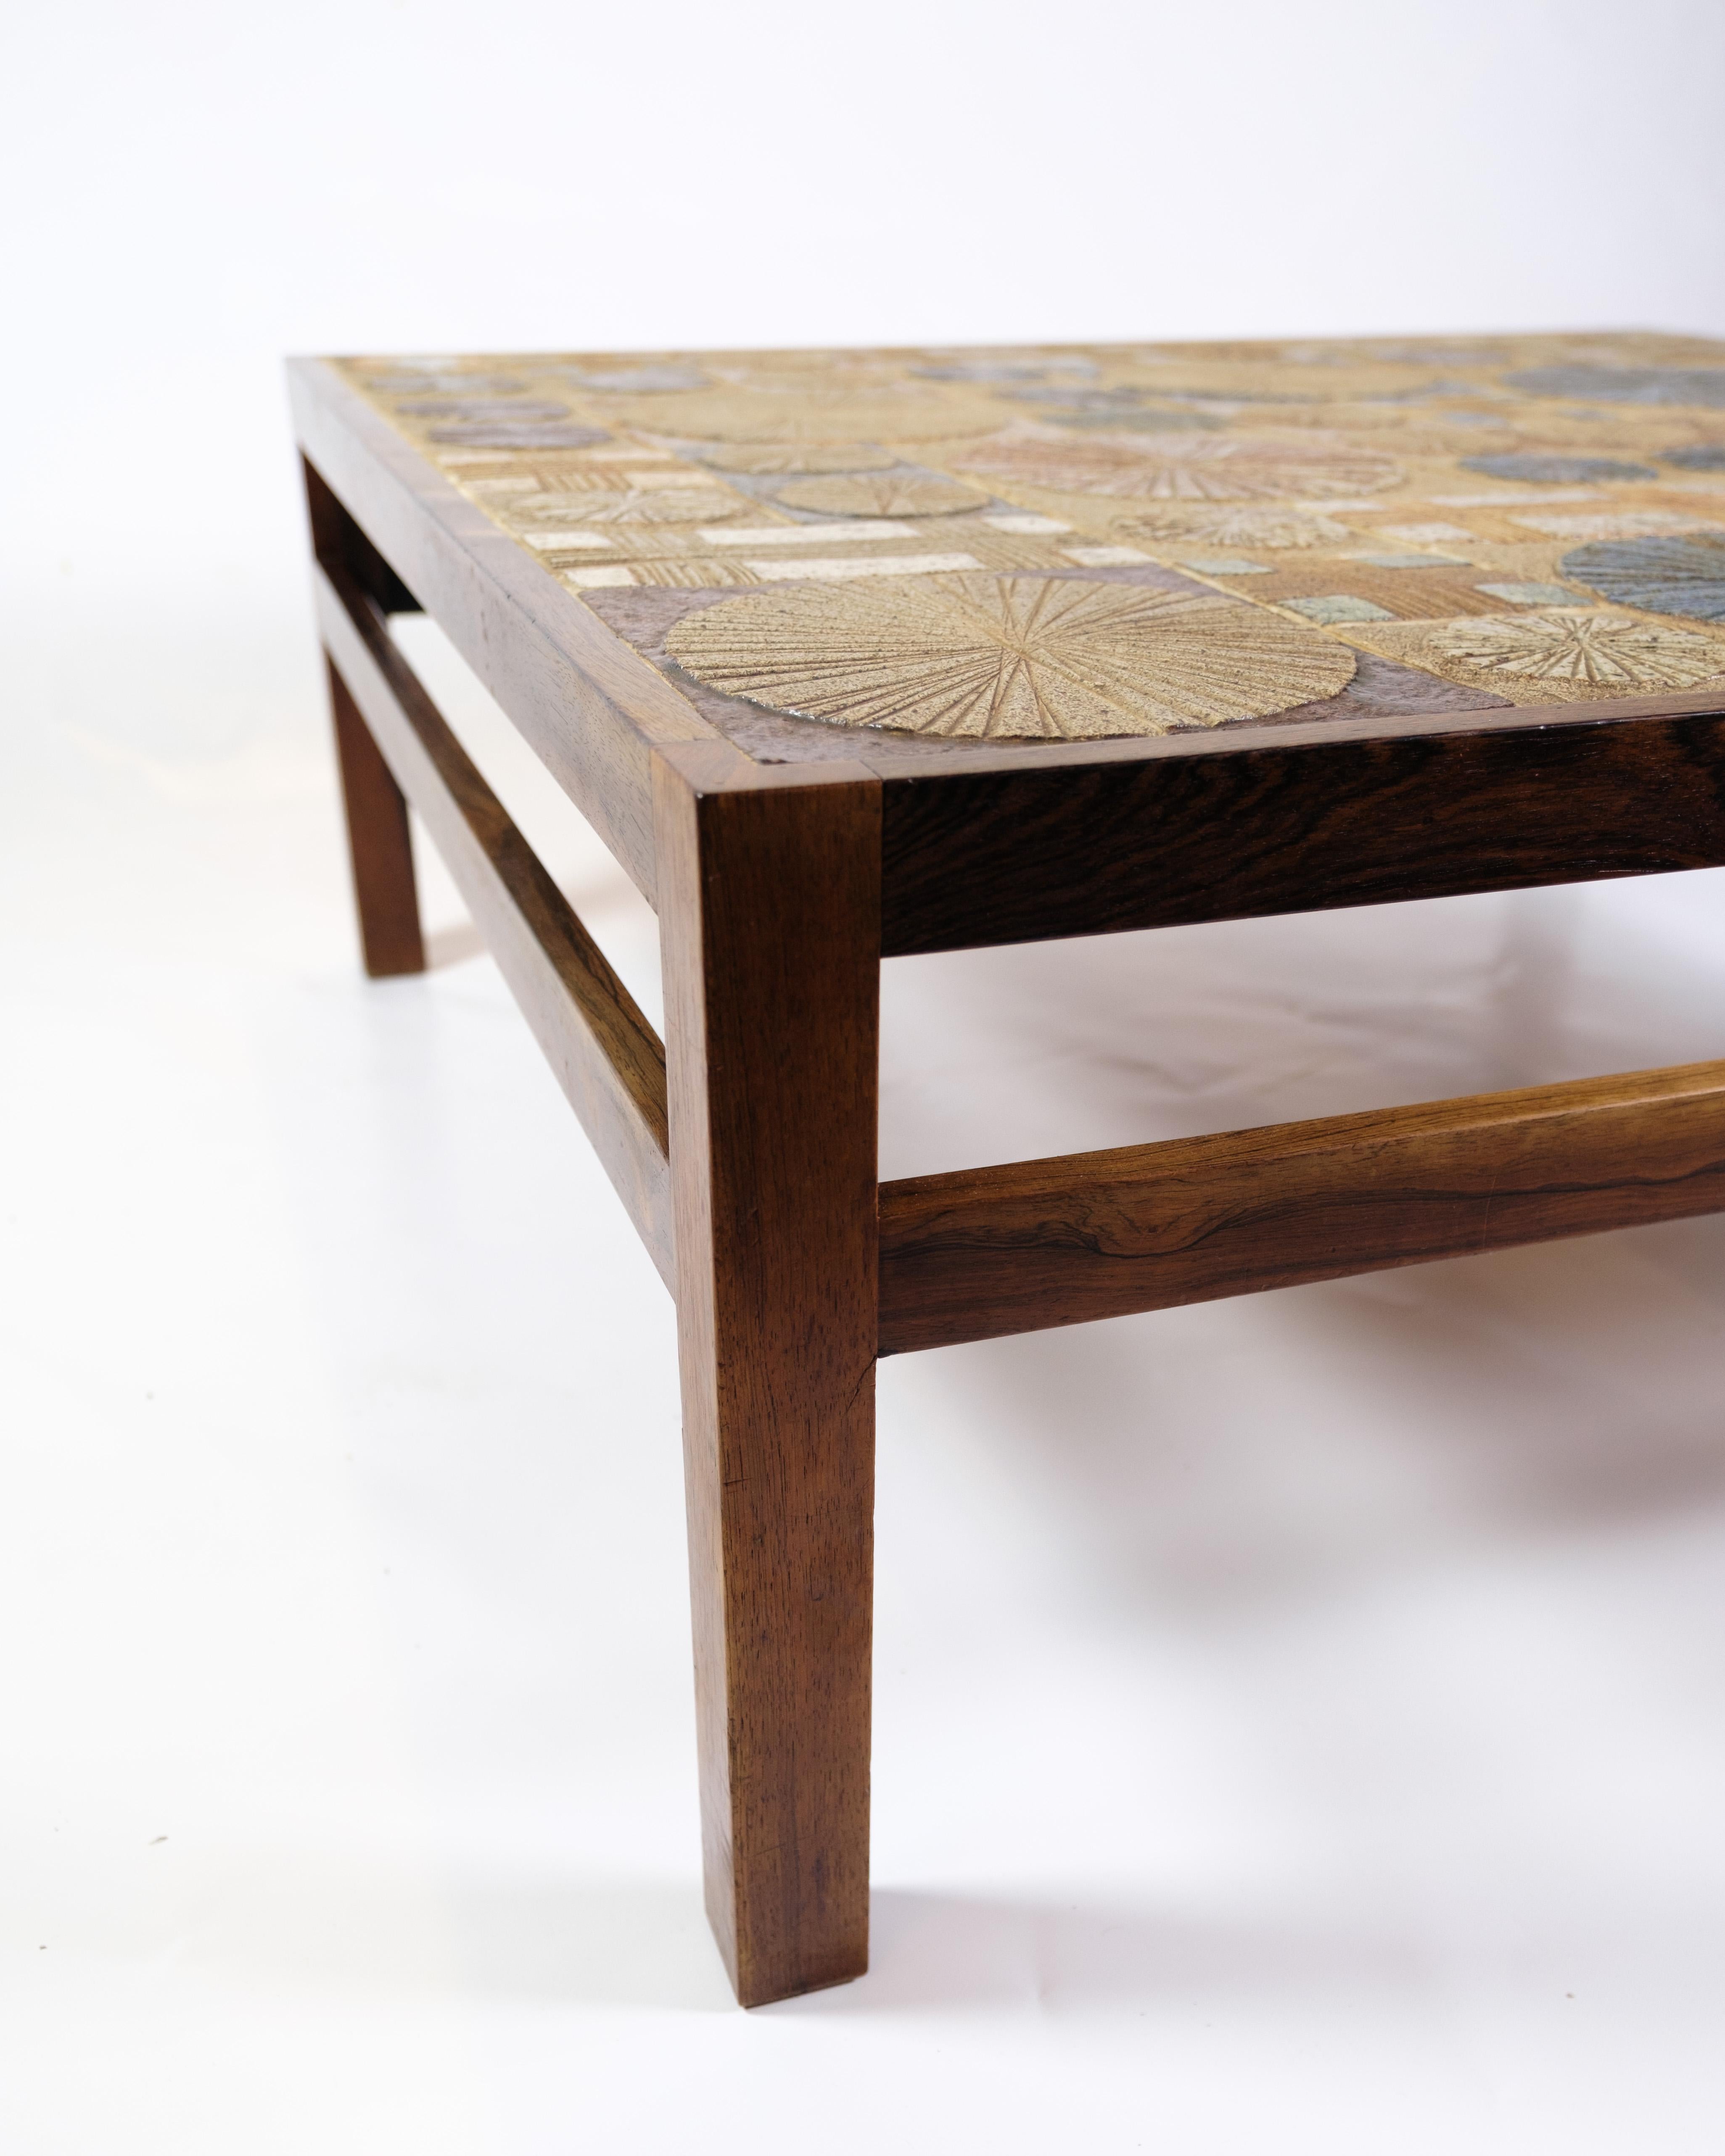 Danish Sofa Table Made In Rosewood With Tiles Designed By Tue Poulsen From 1960s